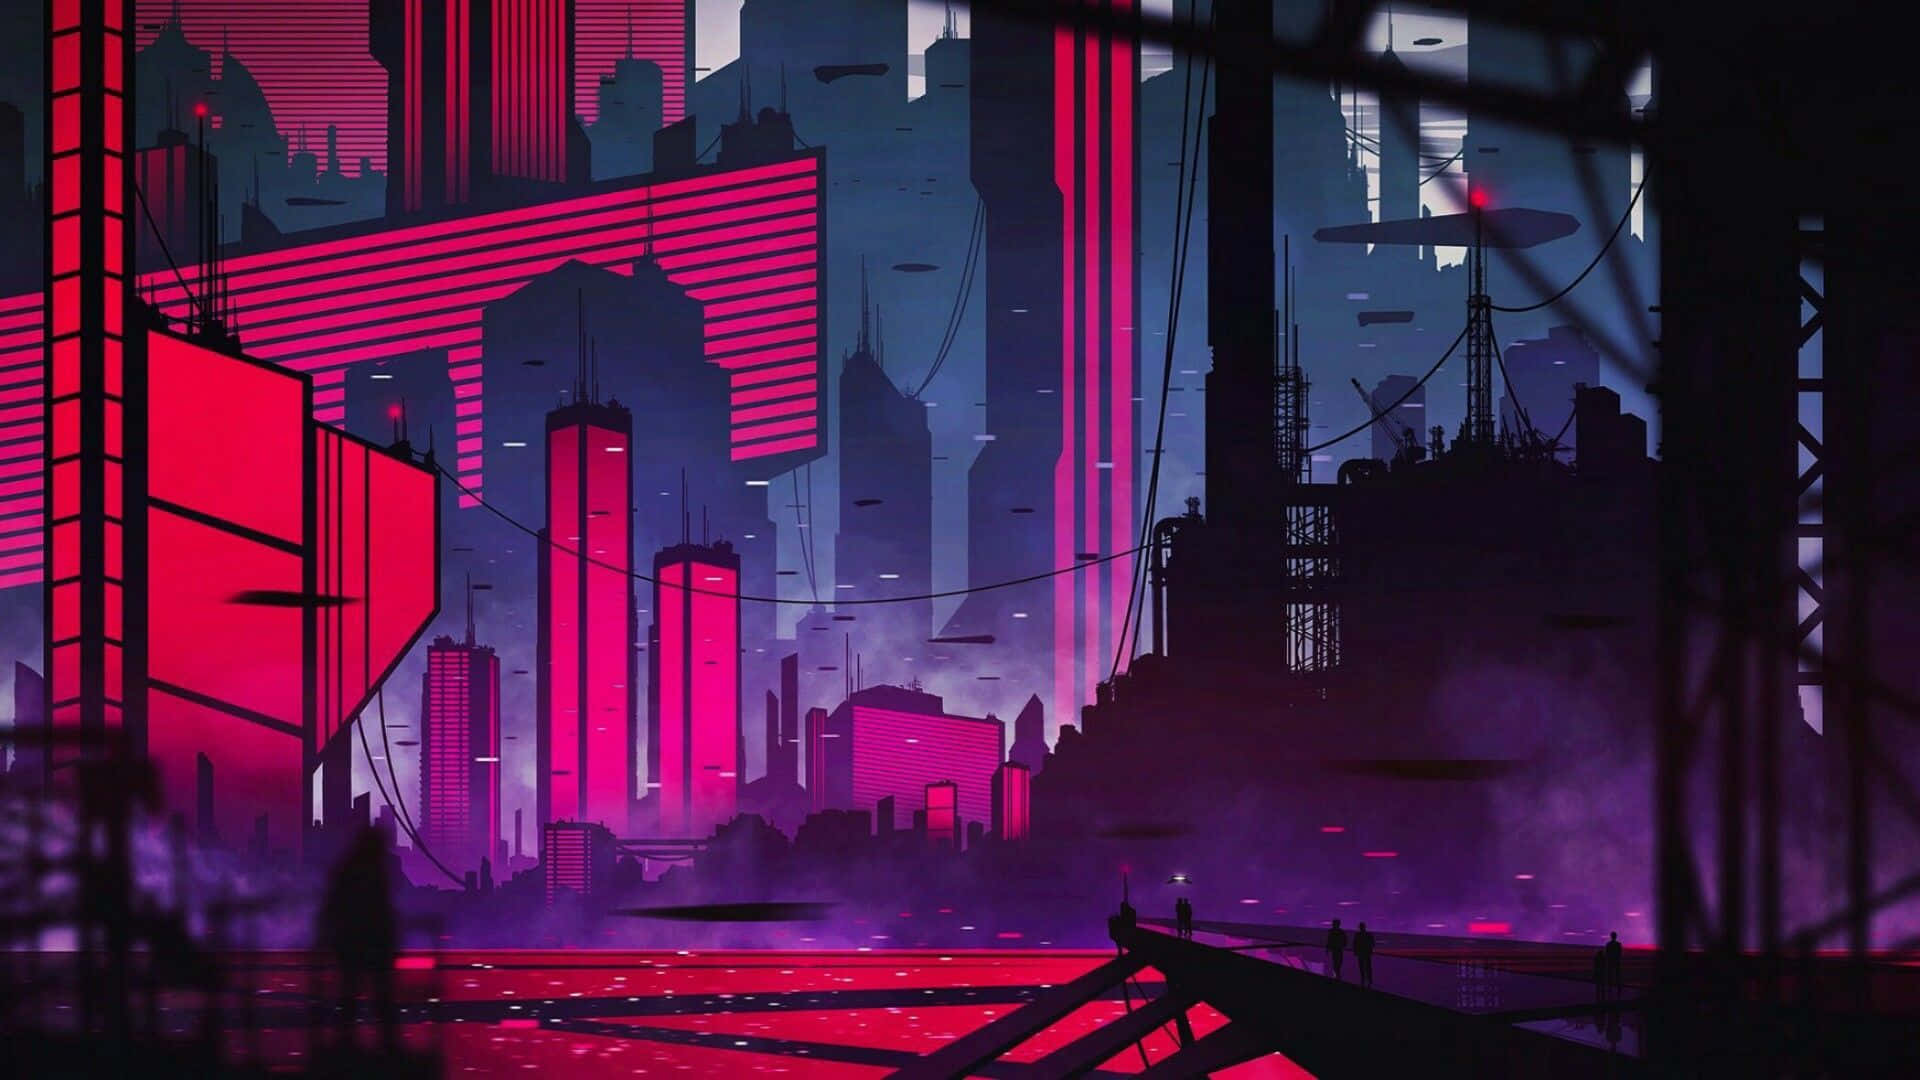 The city of endless neon lights